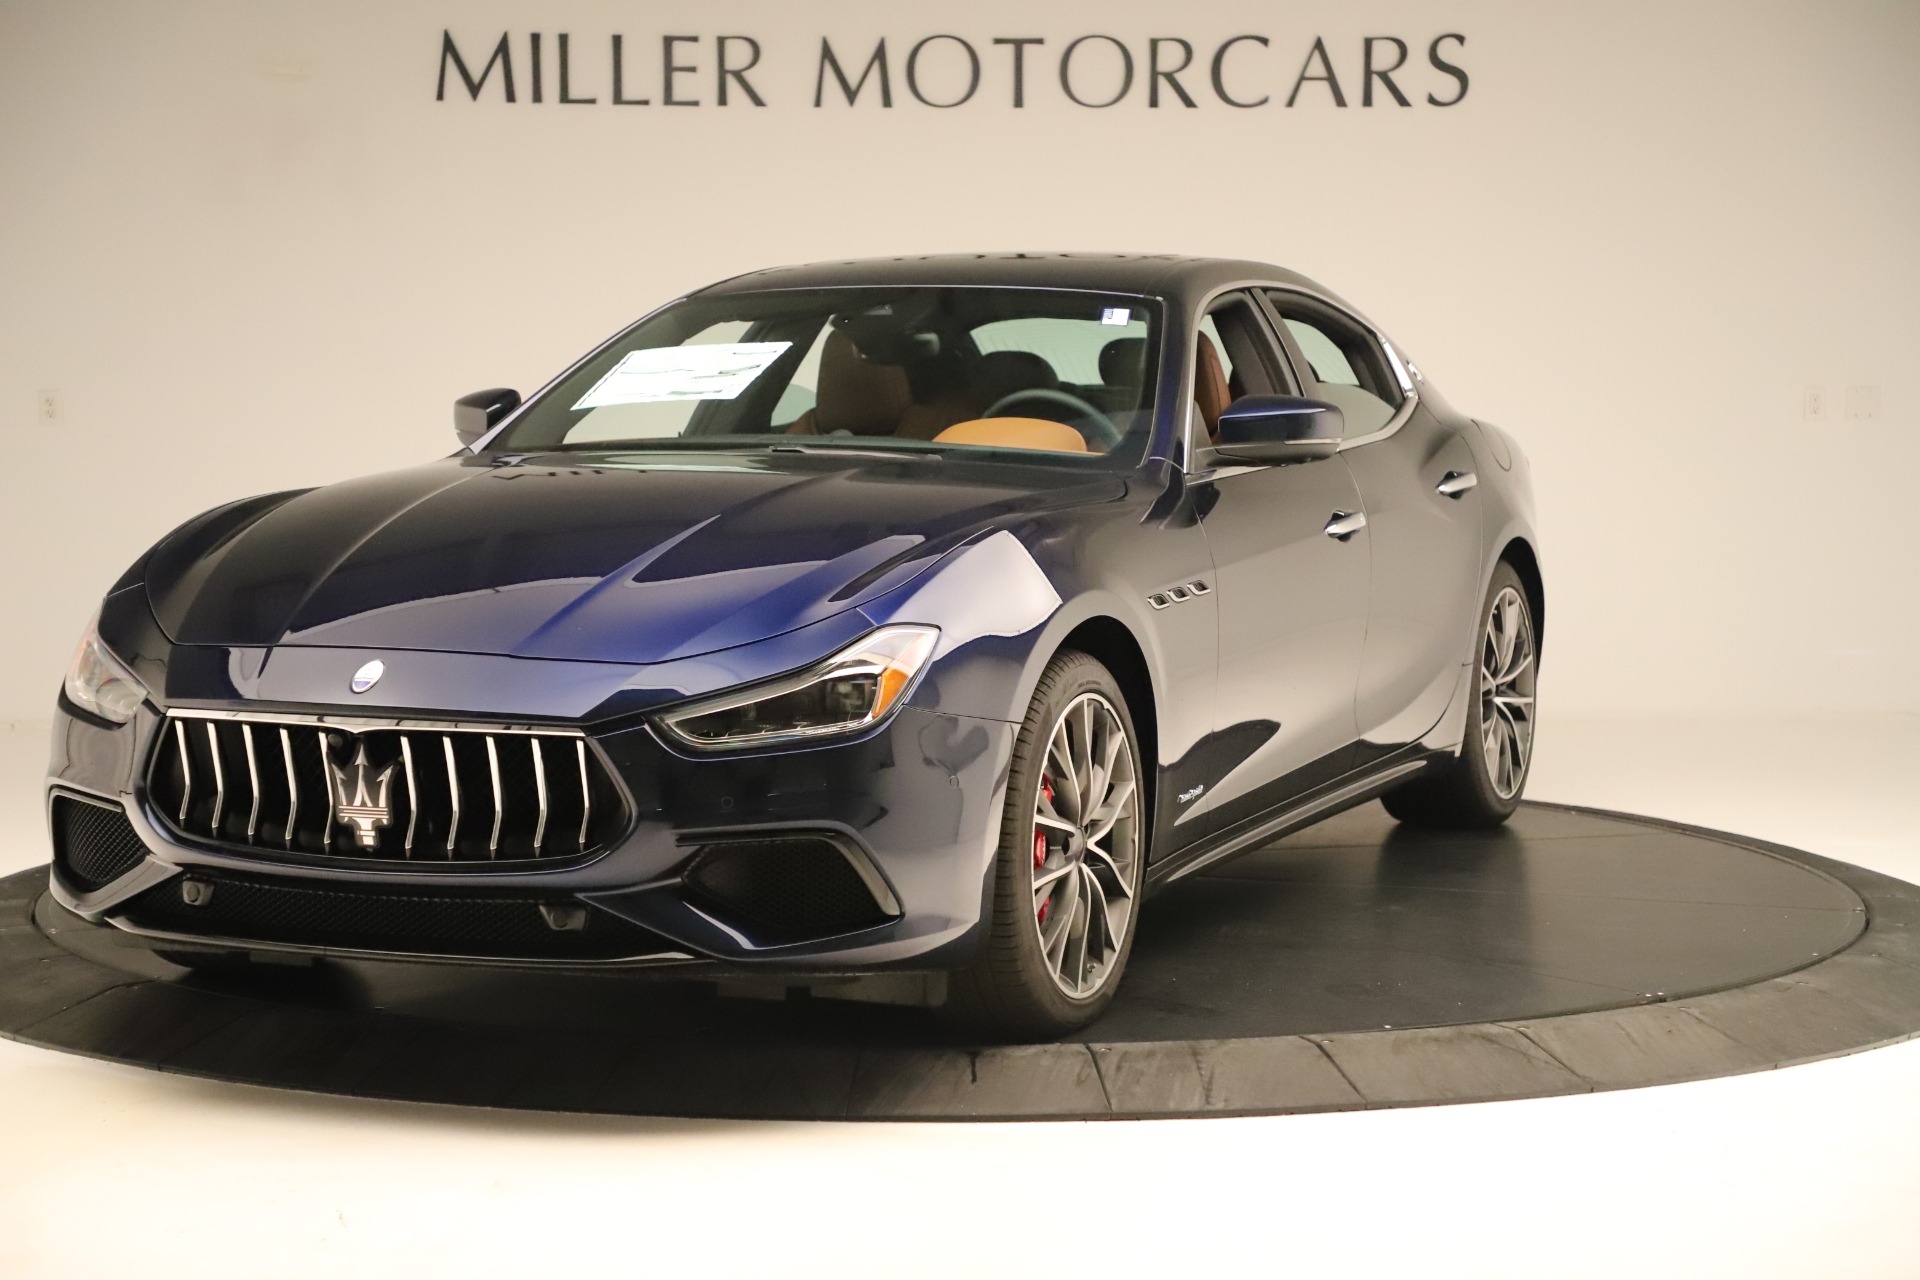 New 2019 Maserati Ghibli S Q4 GranSport for sale Sold at Bentley Greenwich in Greenwich CT 06830 1